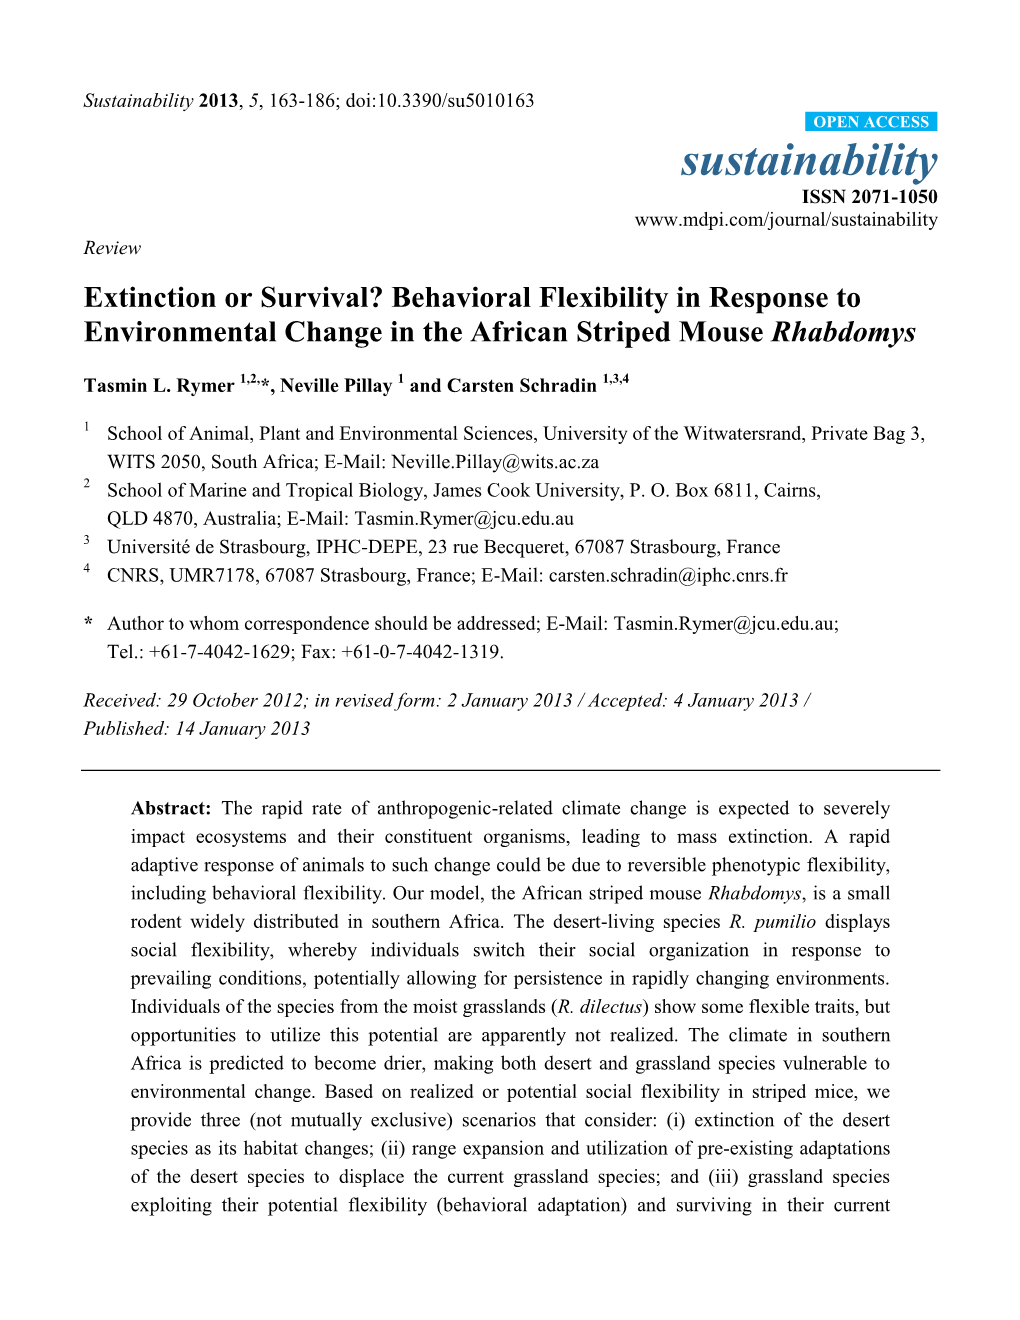 Extinction Or Survival? Behavioral Flexibility in Response to Environmental Change in the African Striped Mouse Rhabdomys